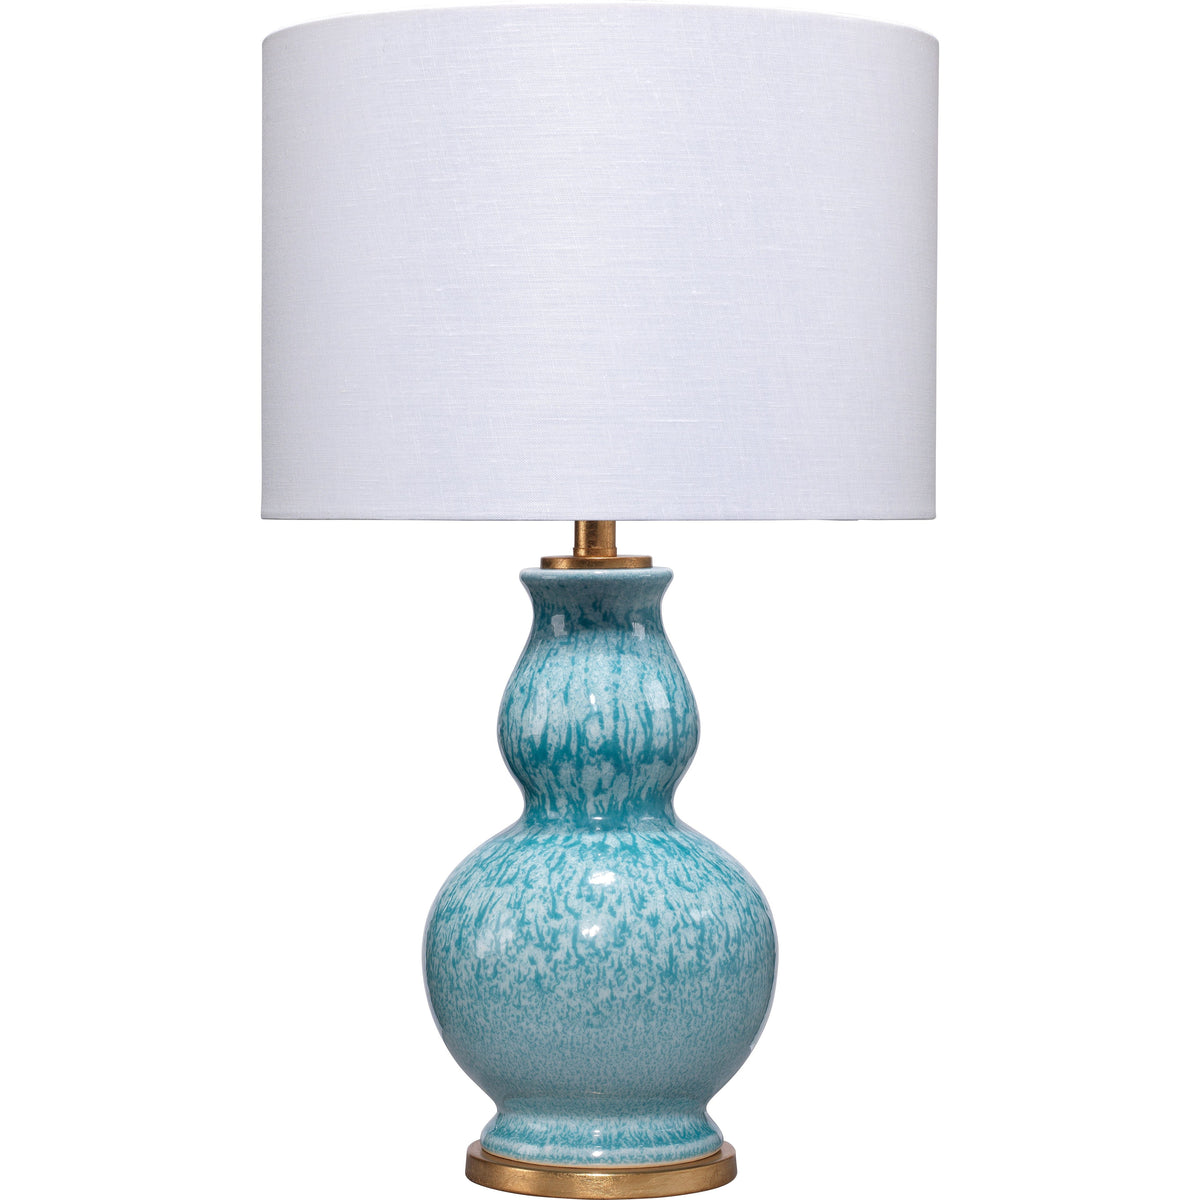 Jamie Young Company - LS9WHITNEYBL - Whitney Table Lamp - Whitney - Blue